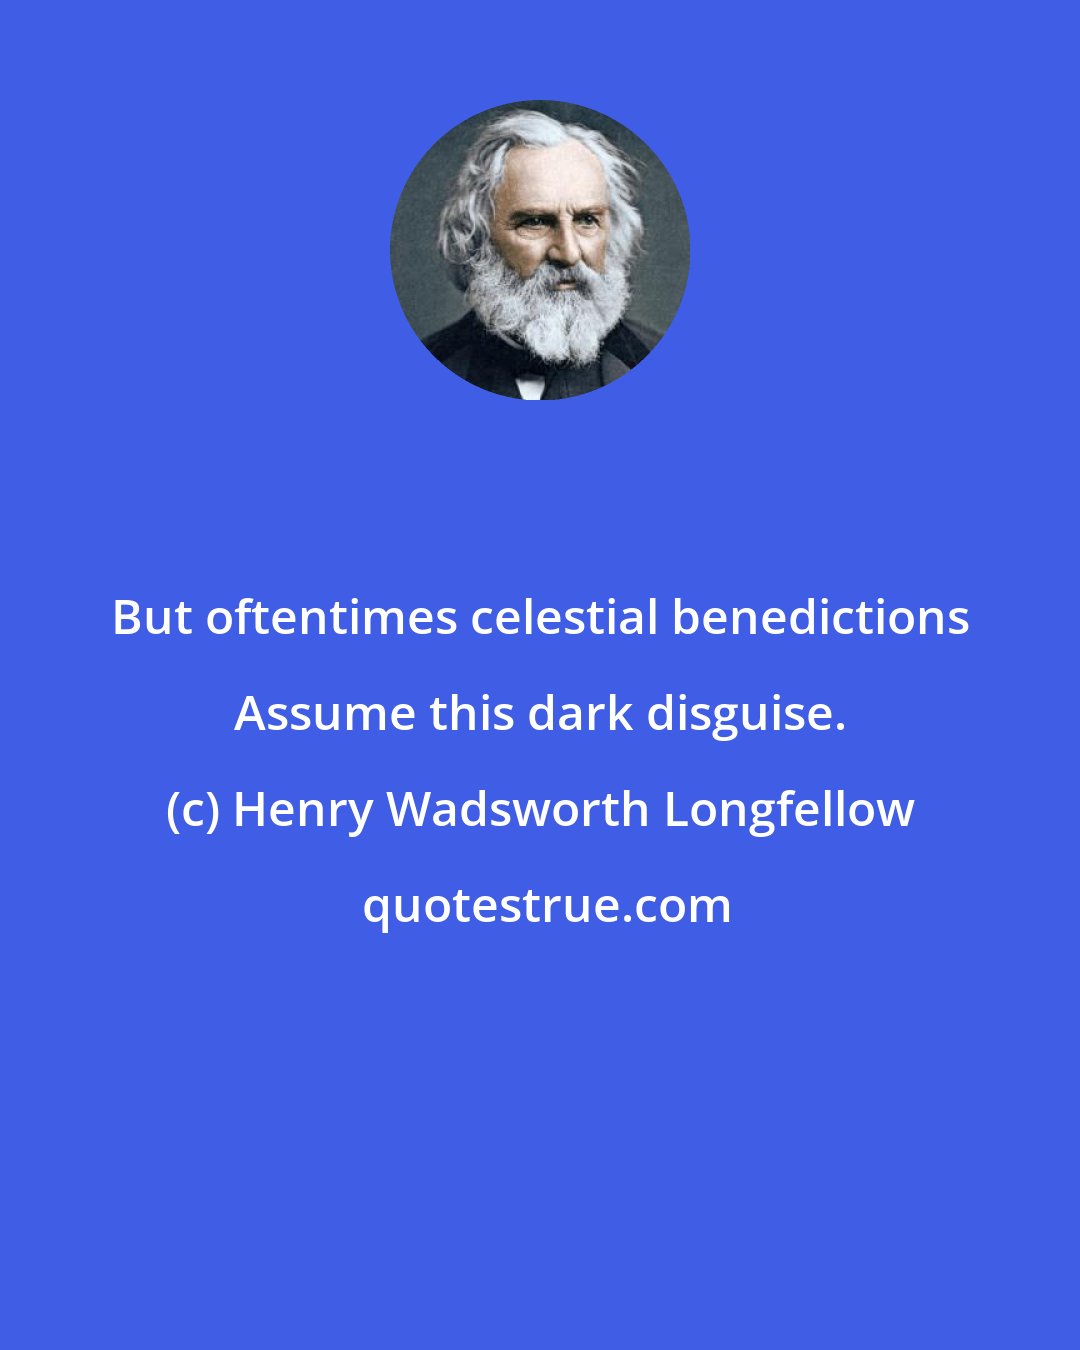 Henry Wadsworth Longfellow: But oftentimes celestial benedictions Assume this dark disguise.